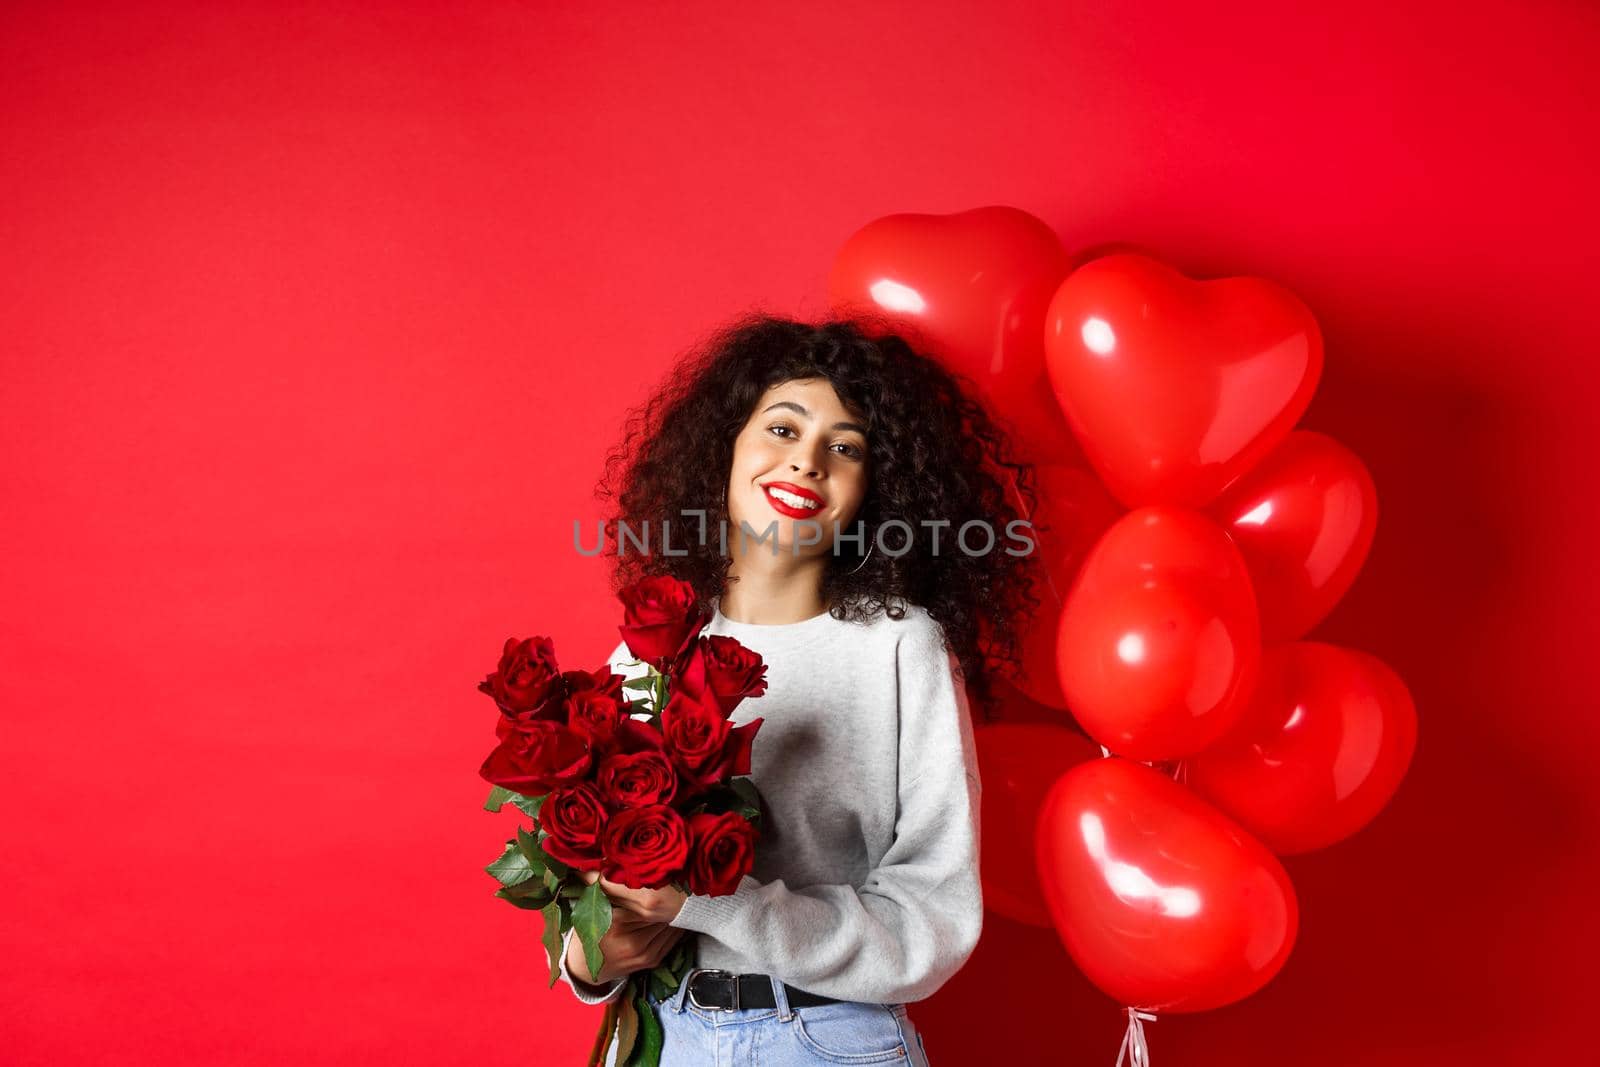 Holidays and celebration. Happy beautiful woman with curly hair, receive bouquet of roses and smiling, standing near party balloons, red background.